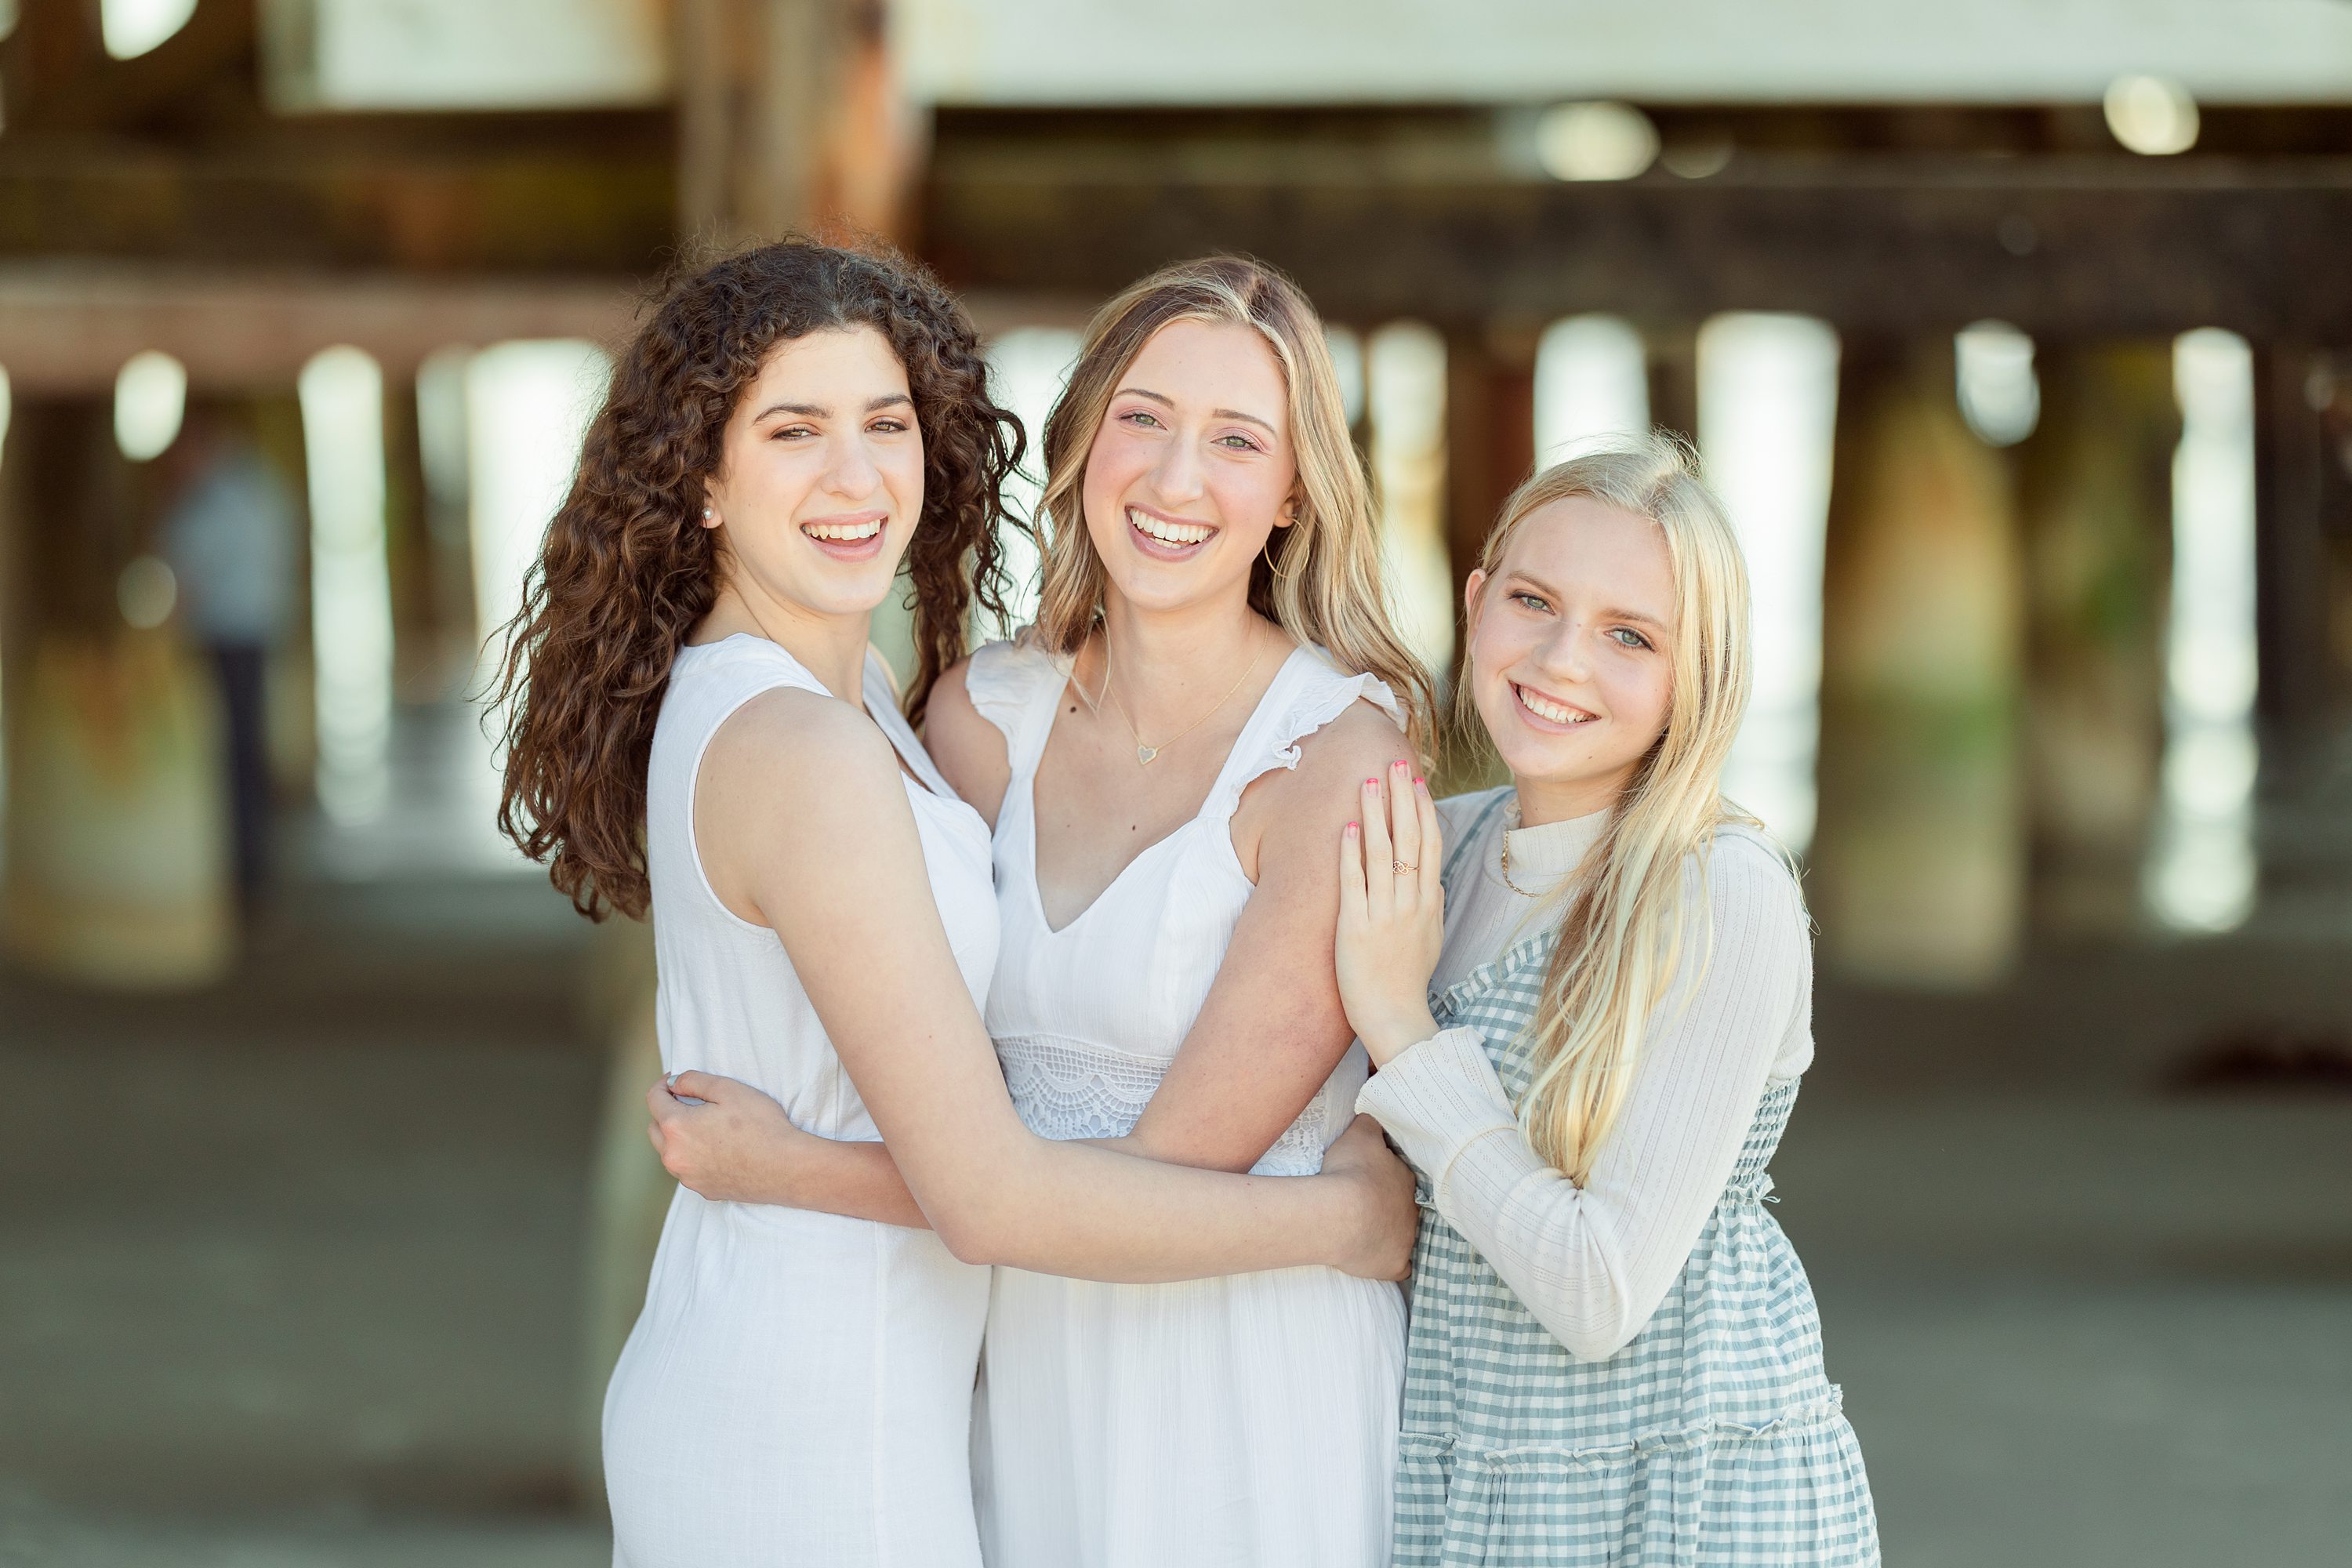 Three Best Friends Posing In Studio, Wearing Summer Style Outfit And Jeans  Shorts. Girls Smiling And Having Fun. Stock Photo, Picture and Royalty Free  Image. Image 50579886.